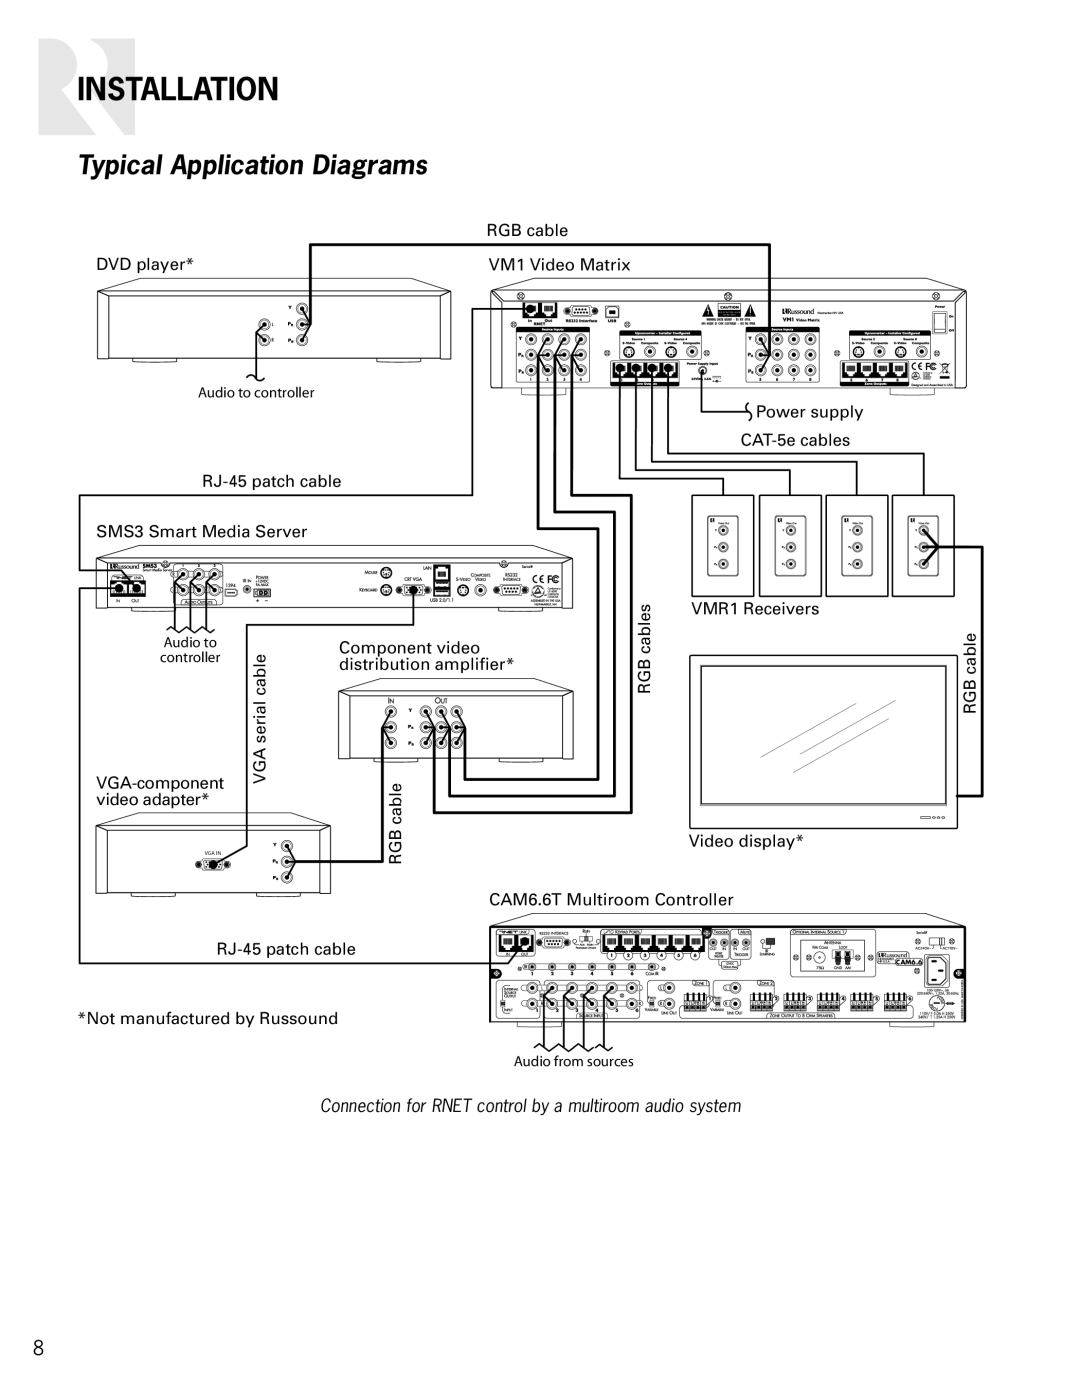 Russound VM1 manual Typical Application Diagrams, Installation, Connection for RNET control by a multiroom audio system 